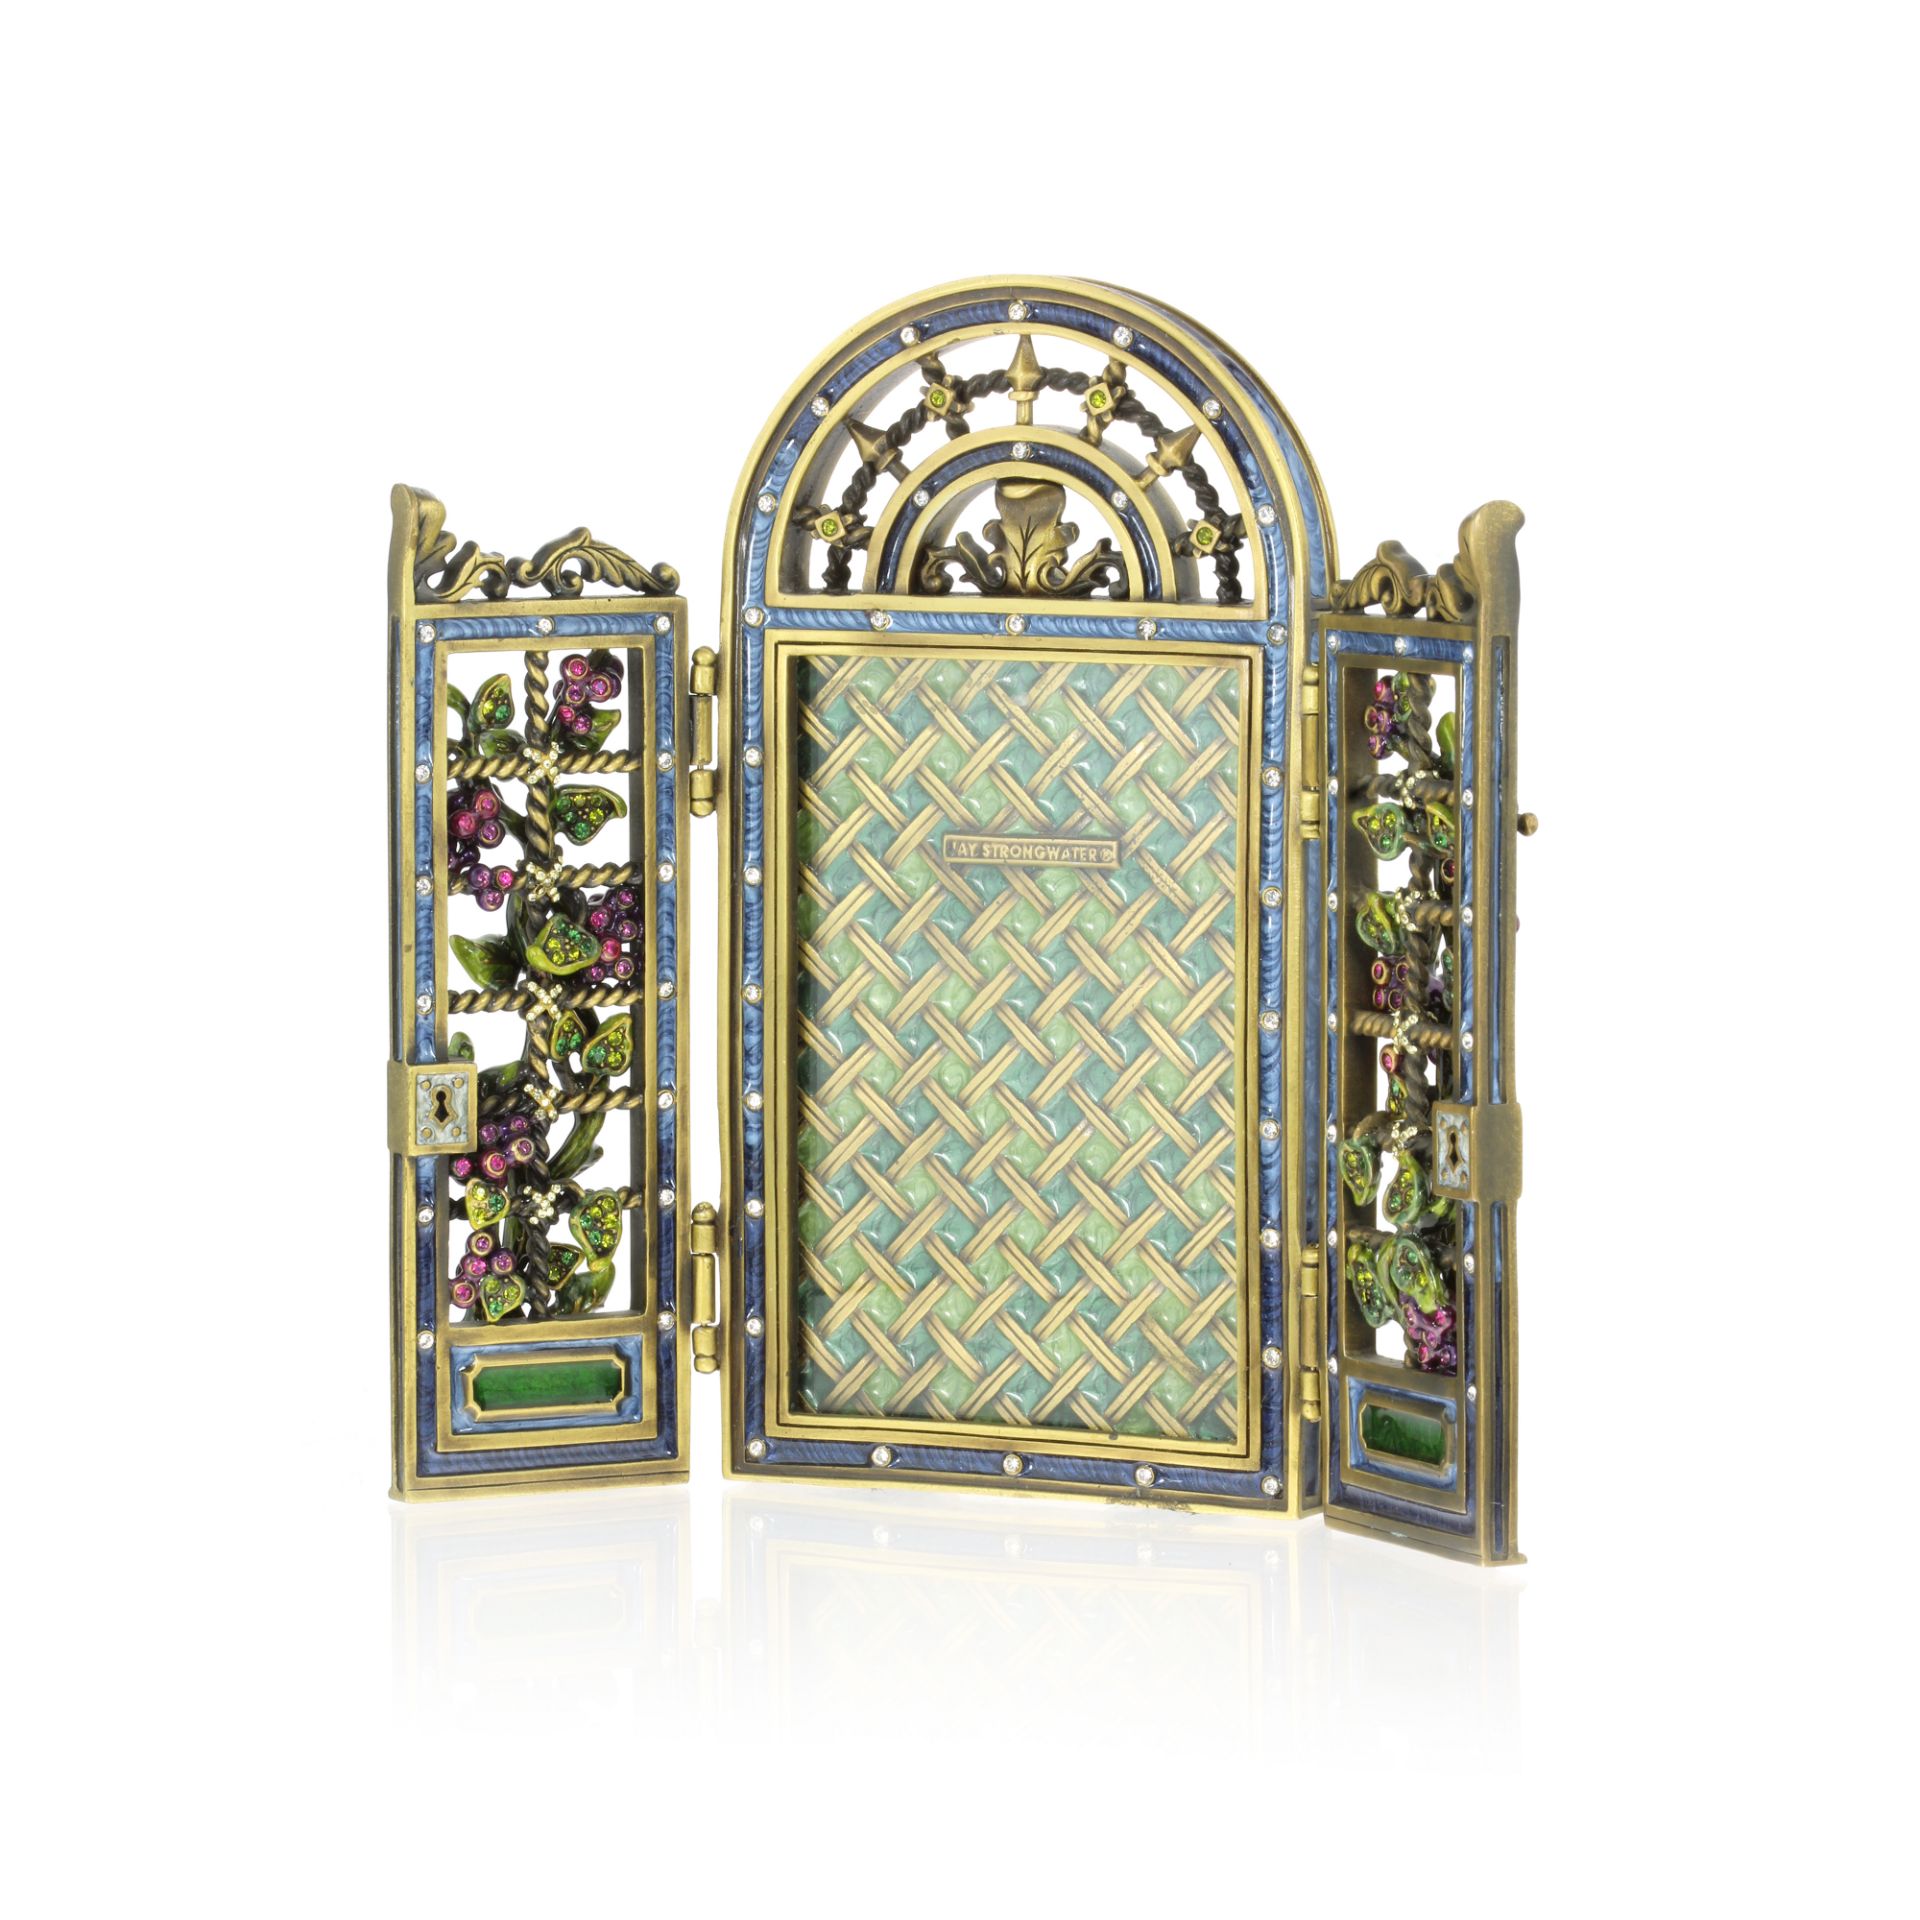 A JEWELLED PHOTOGRAPH FRAME, JAY STRONGWATER designed as an arch with folding double door front